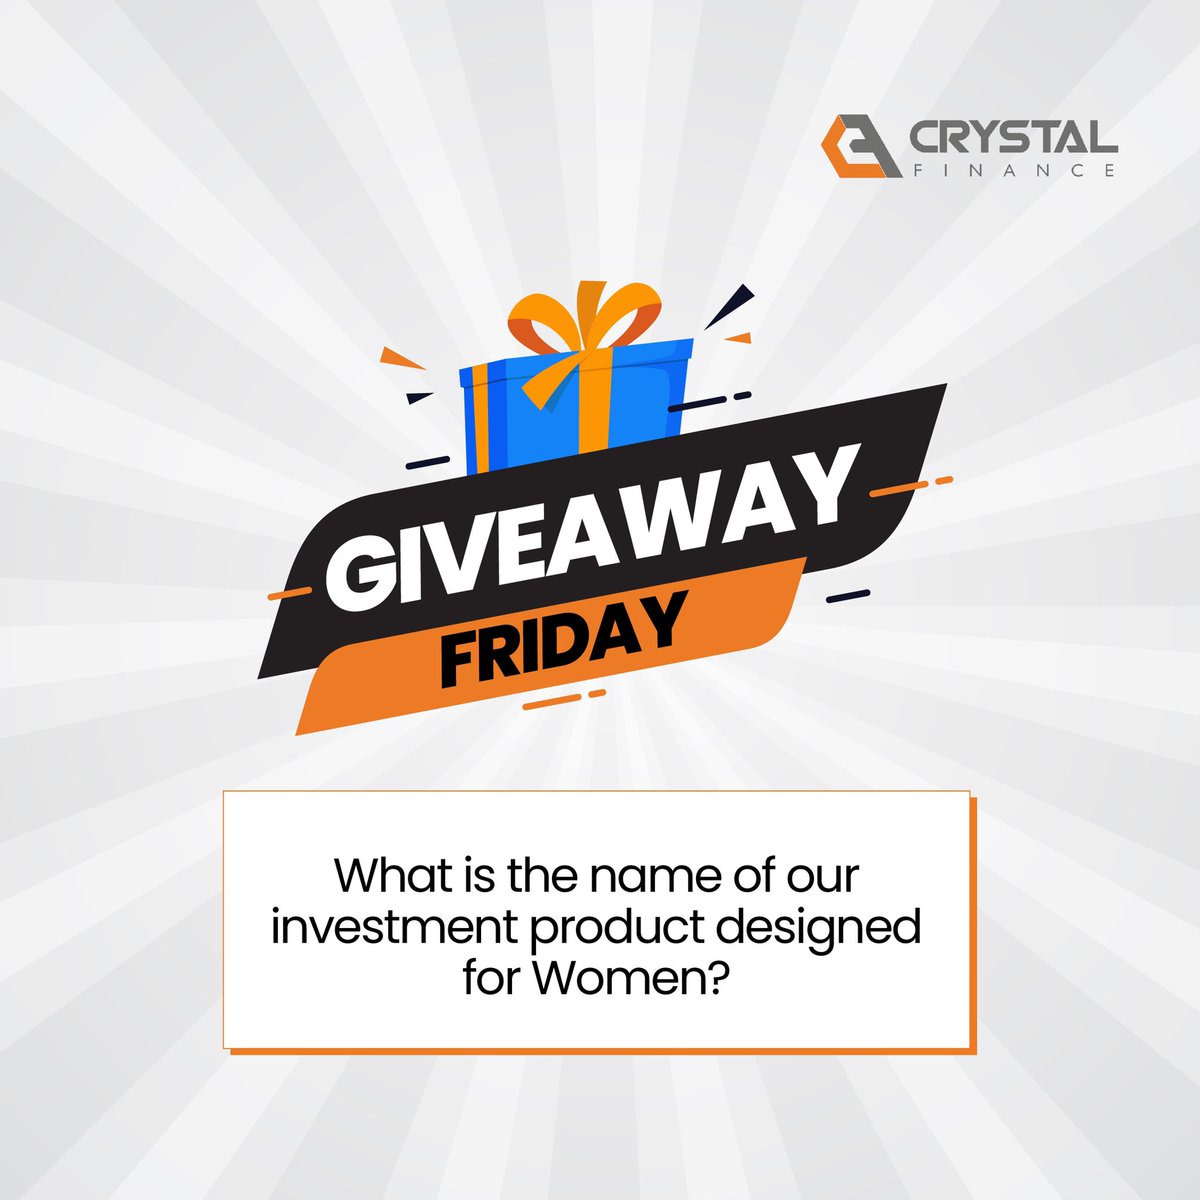 Urgent 2k anyone? Simply drop your comments on our Instagram page.

Hint: The answer is on our page 😉

#GiveawayFriday #CrystalFinanceng